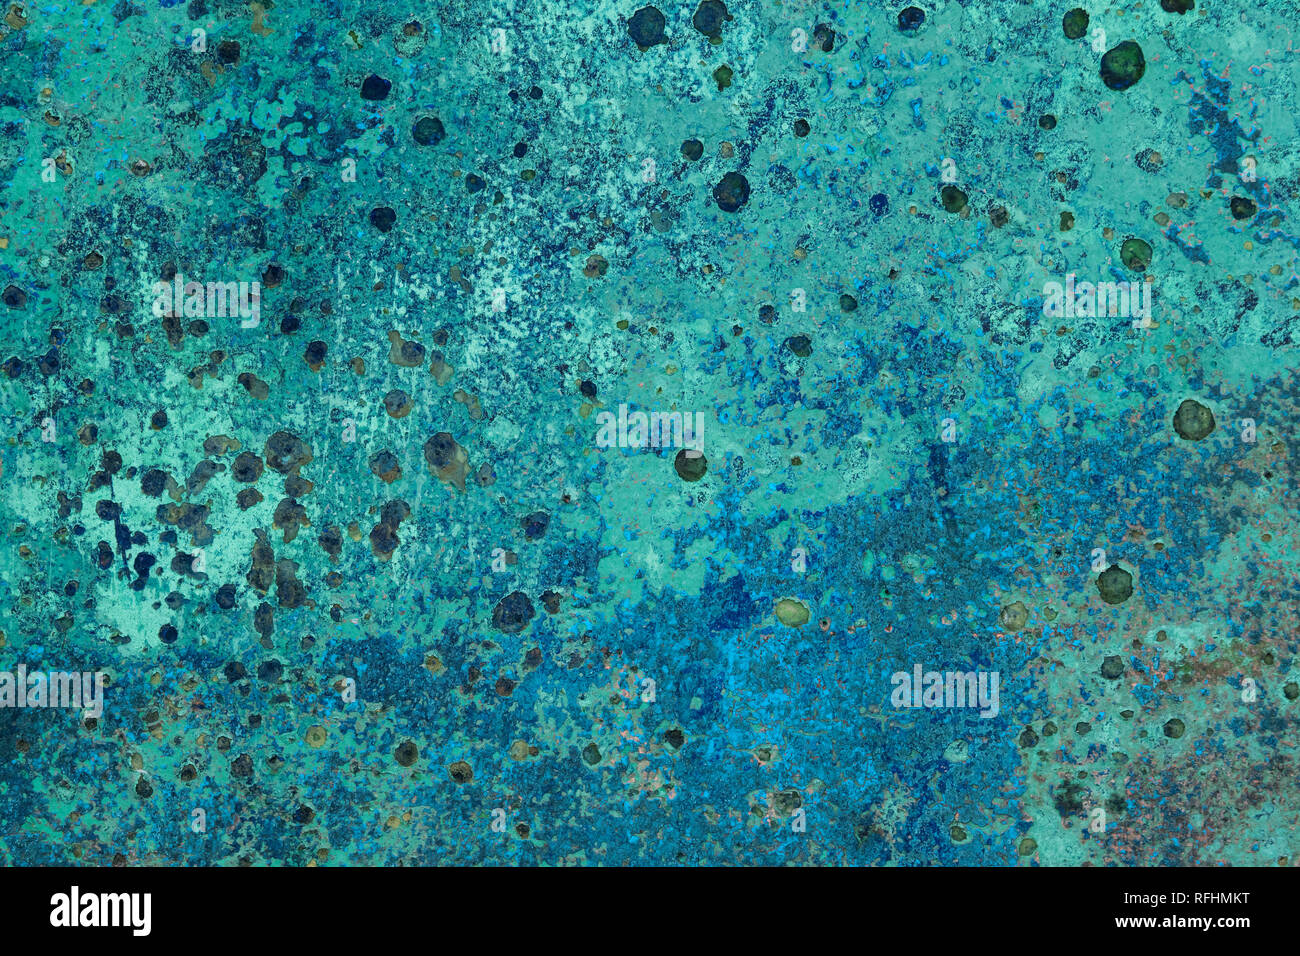 Metal corrosion patterns on an old turquoise painted boat, Ireland Stock Photo